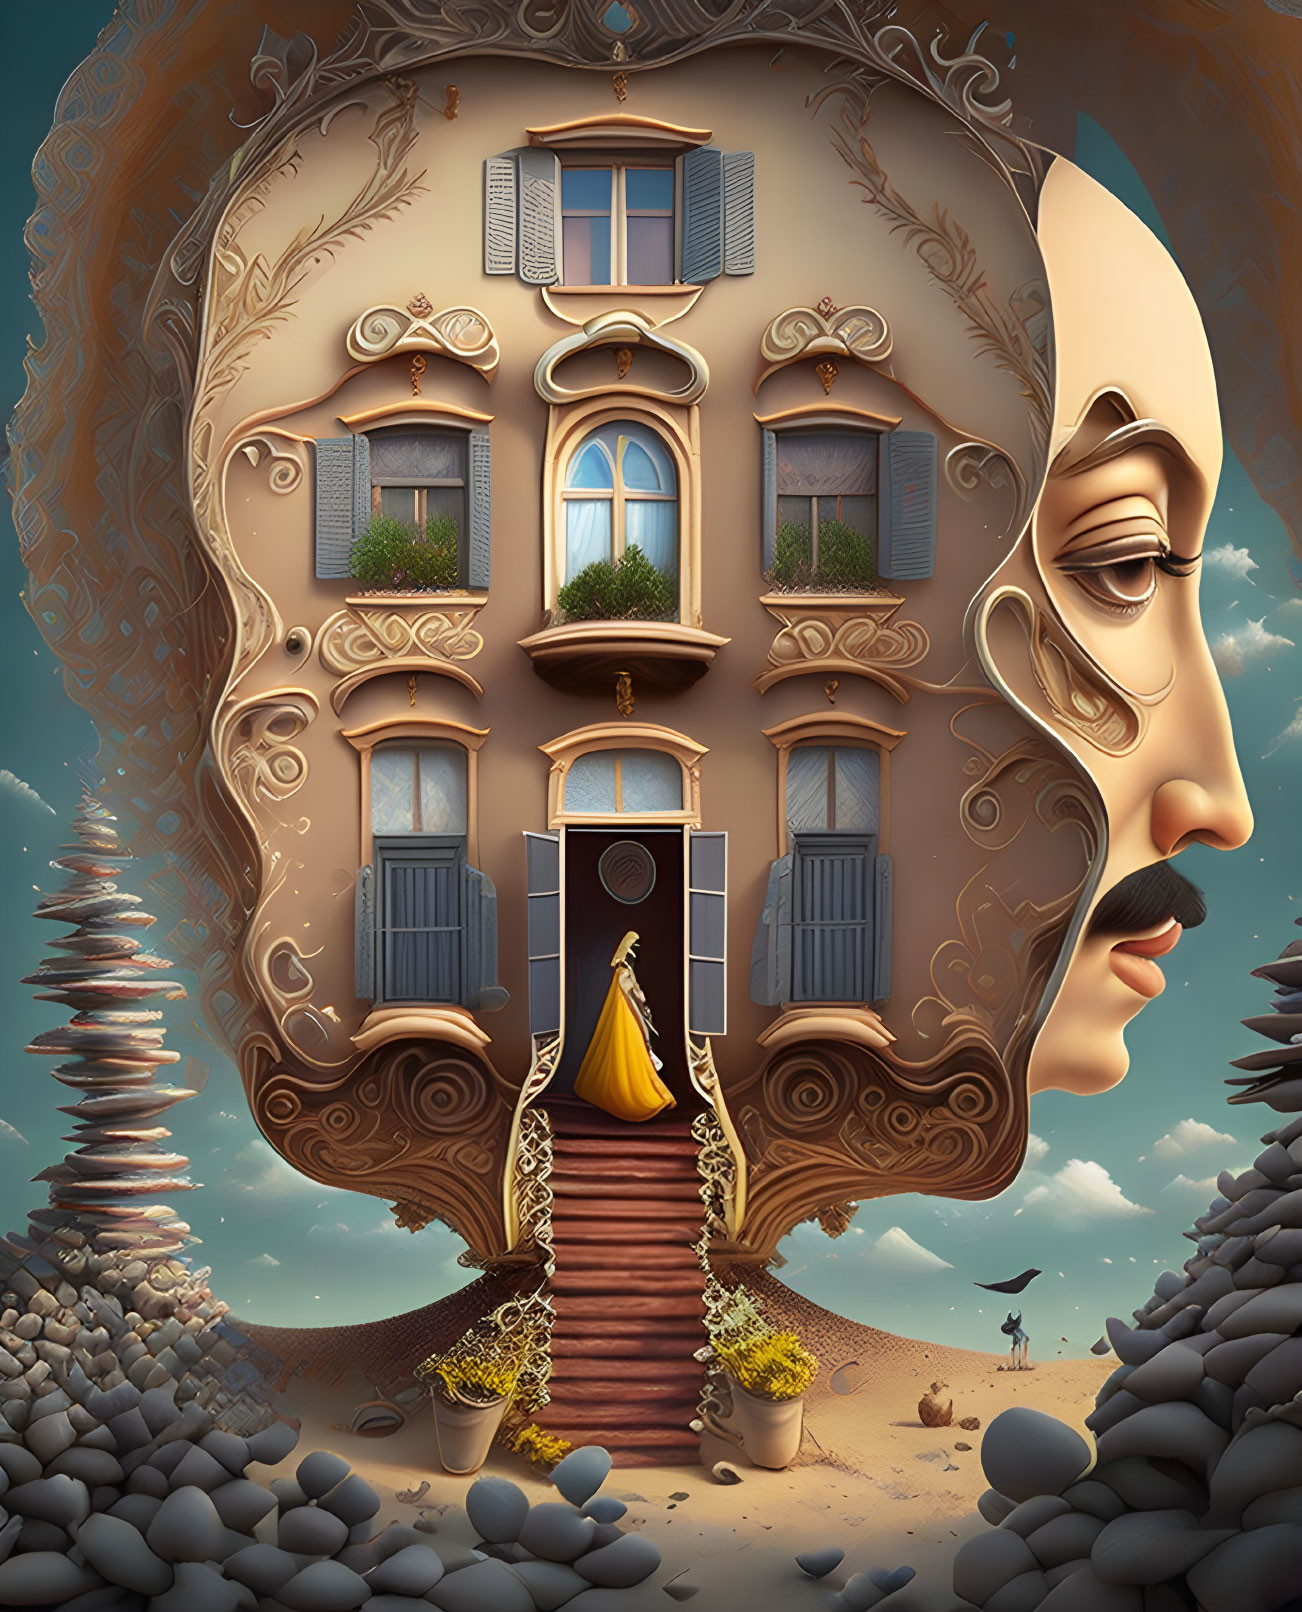 Surrealist image of human face building, floating islands, person in yellow dress